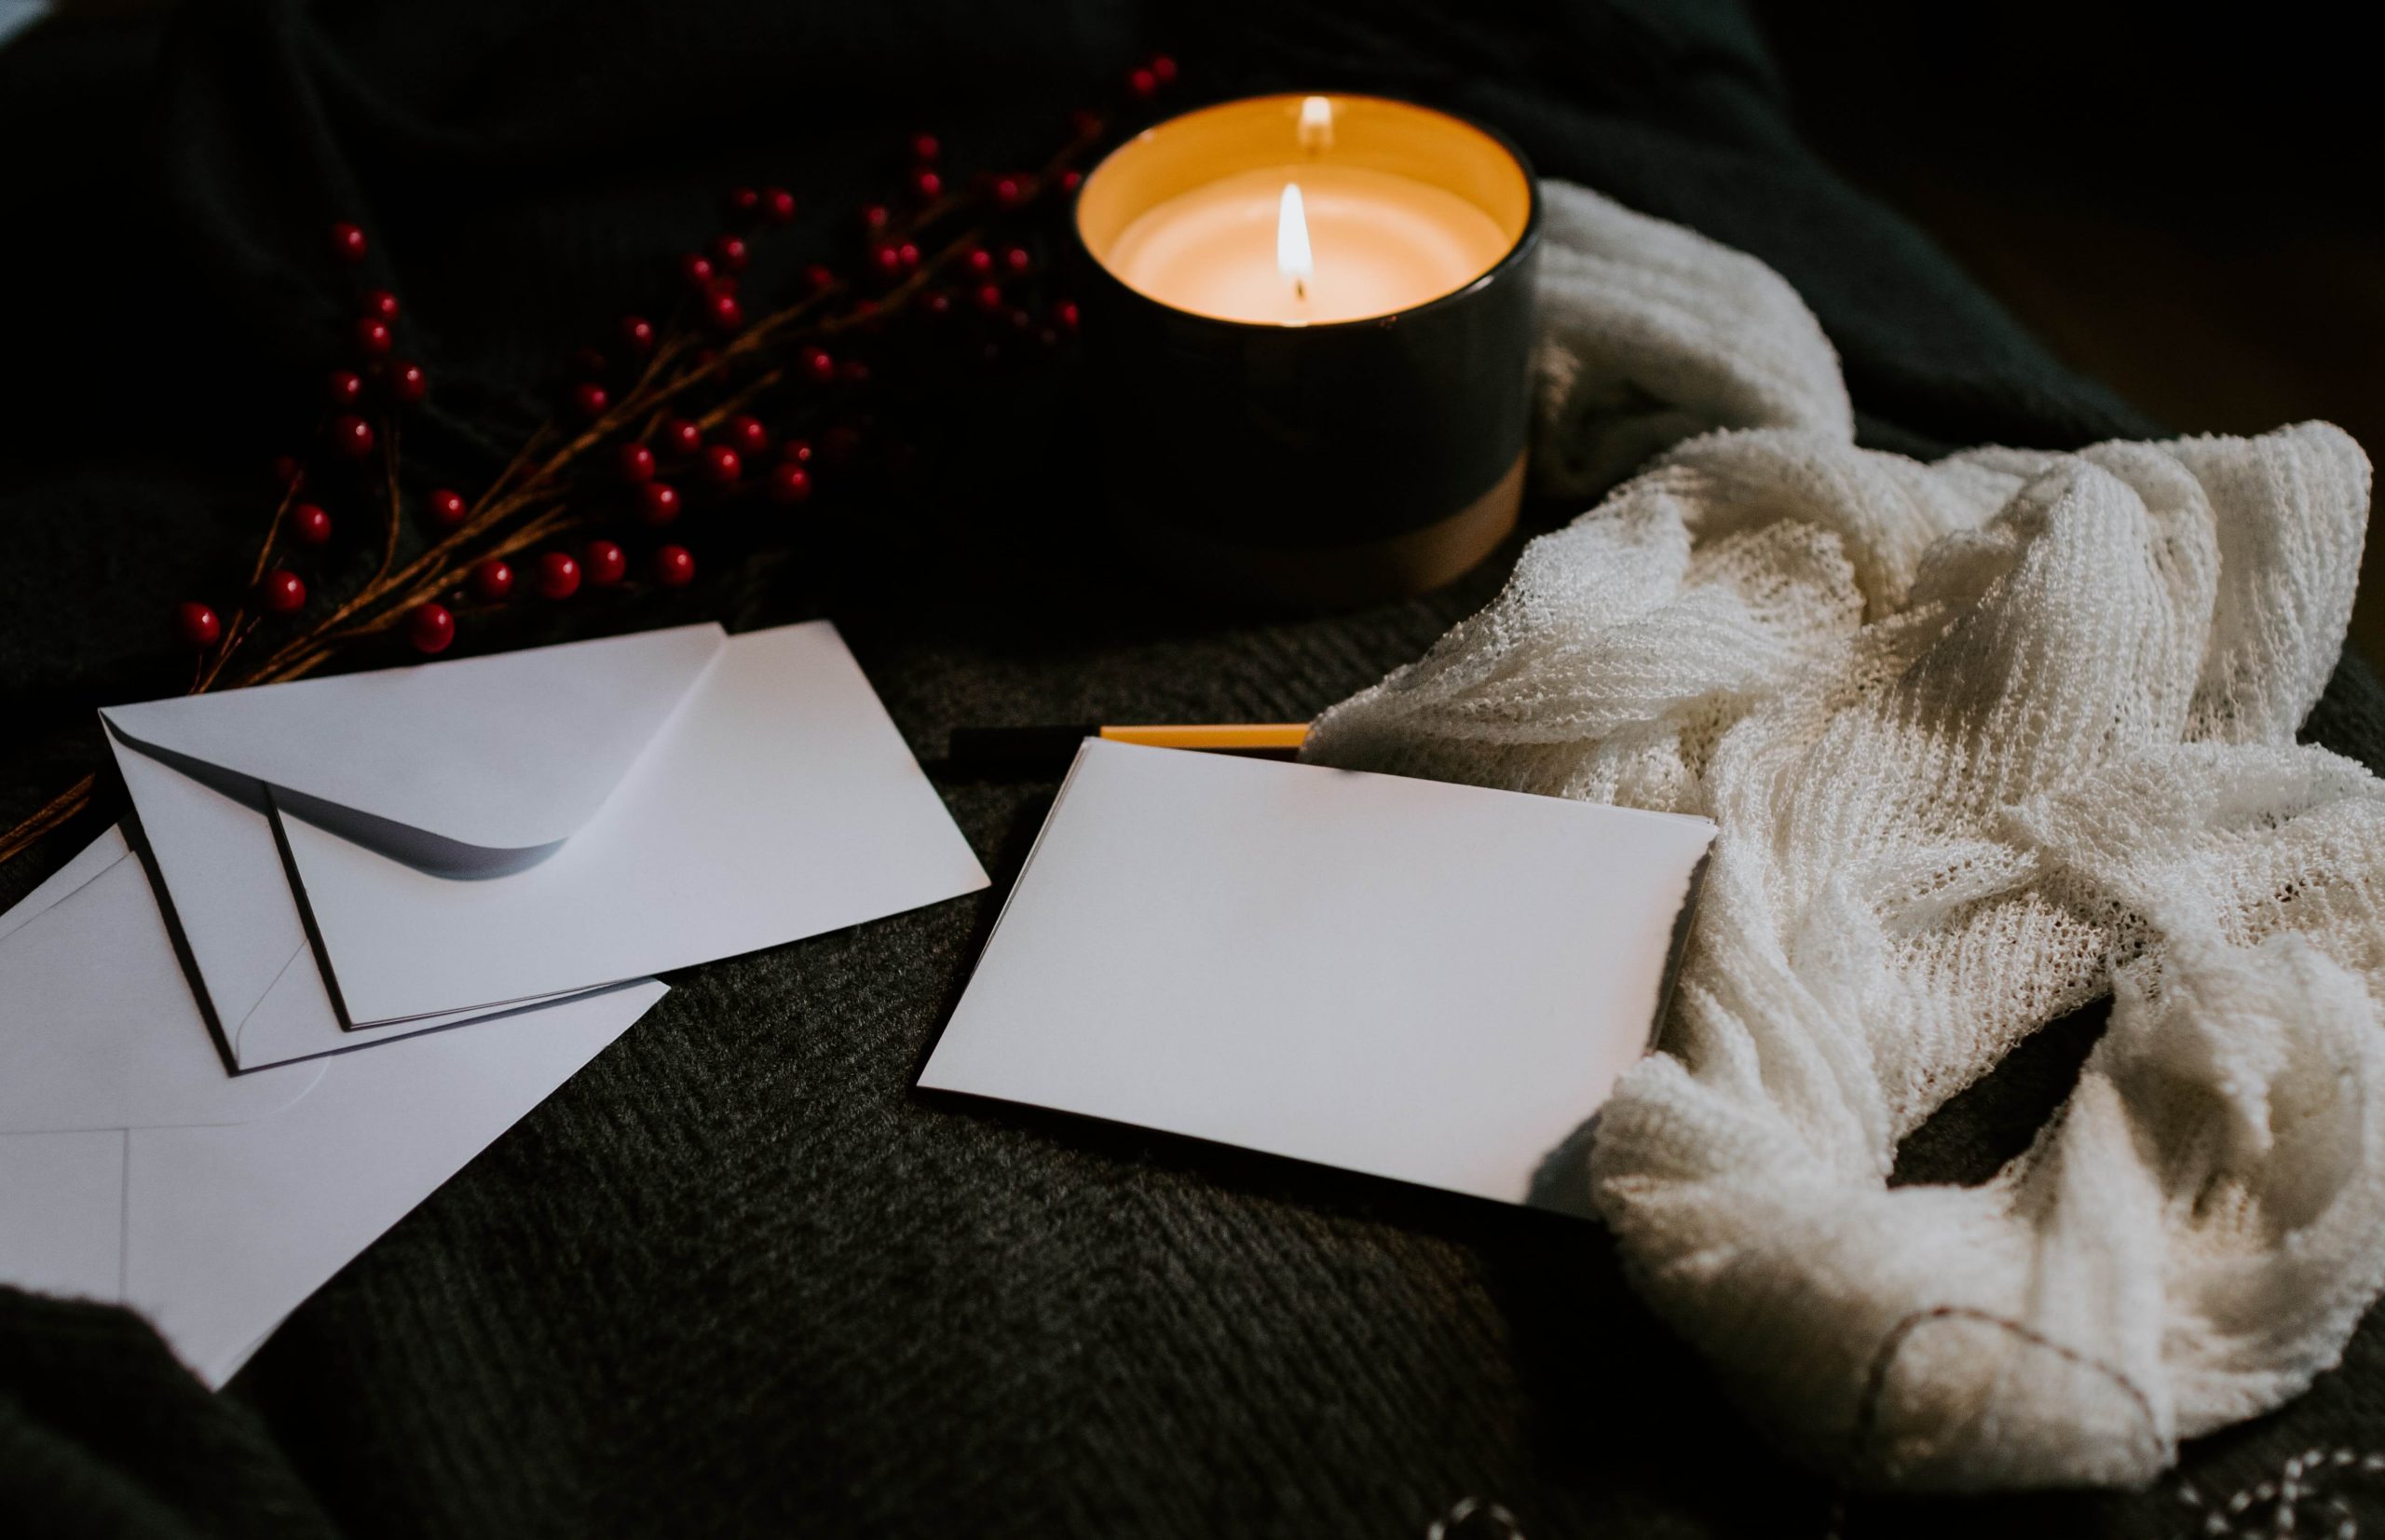 Image of letters and a lit candle on a cozy blanket